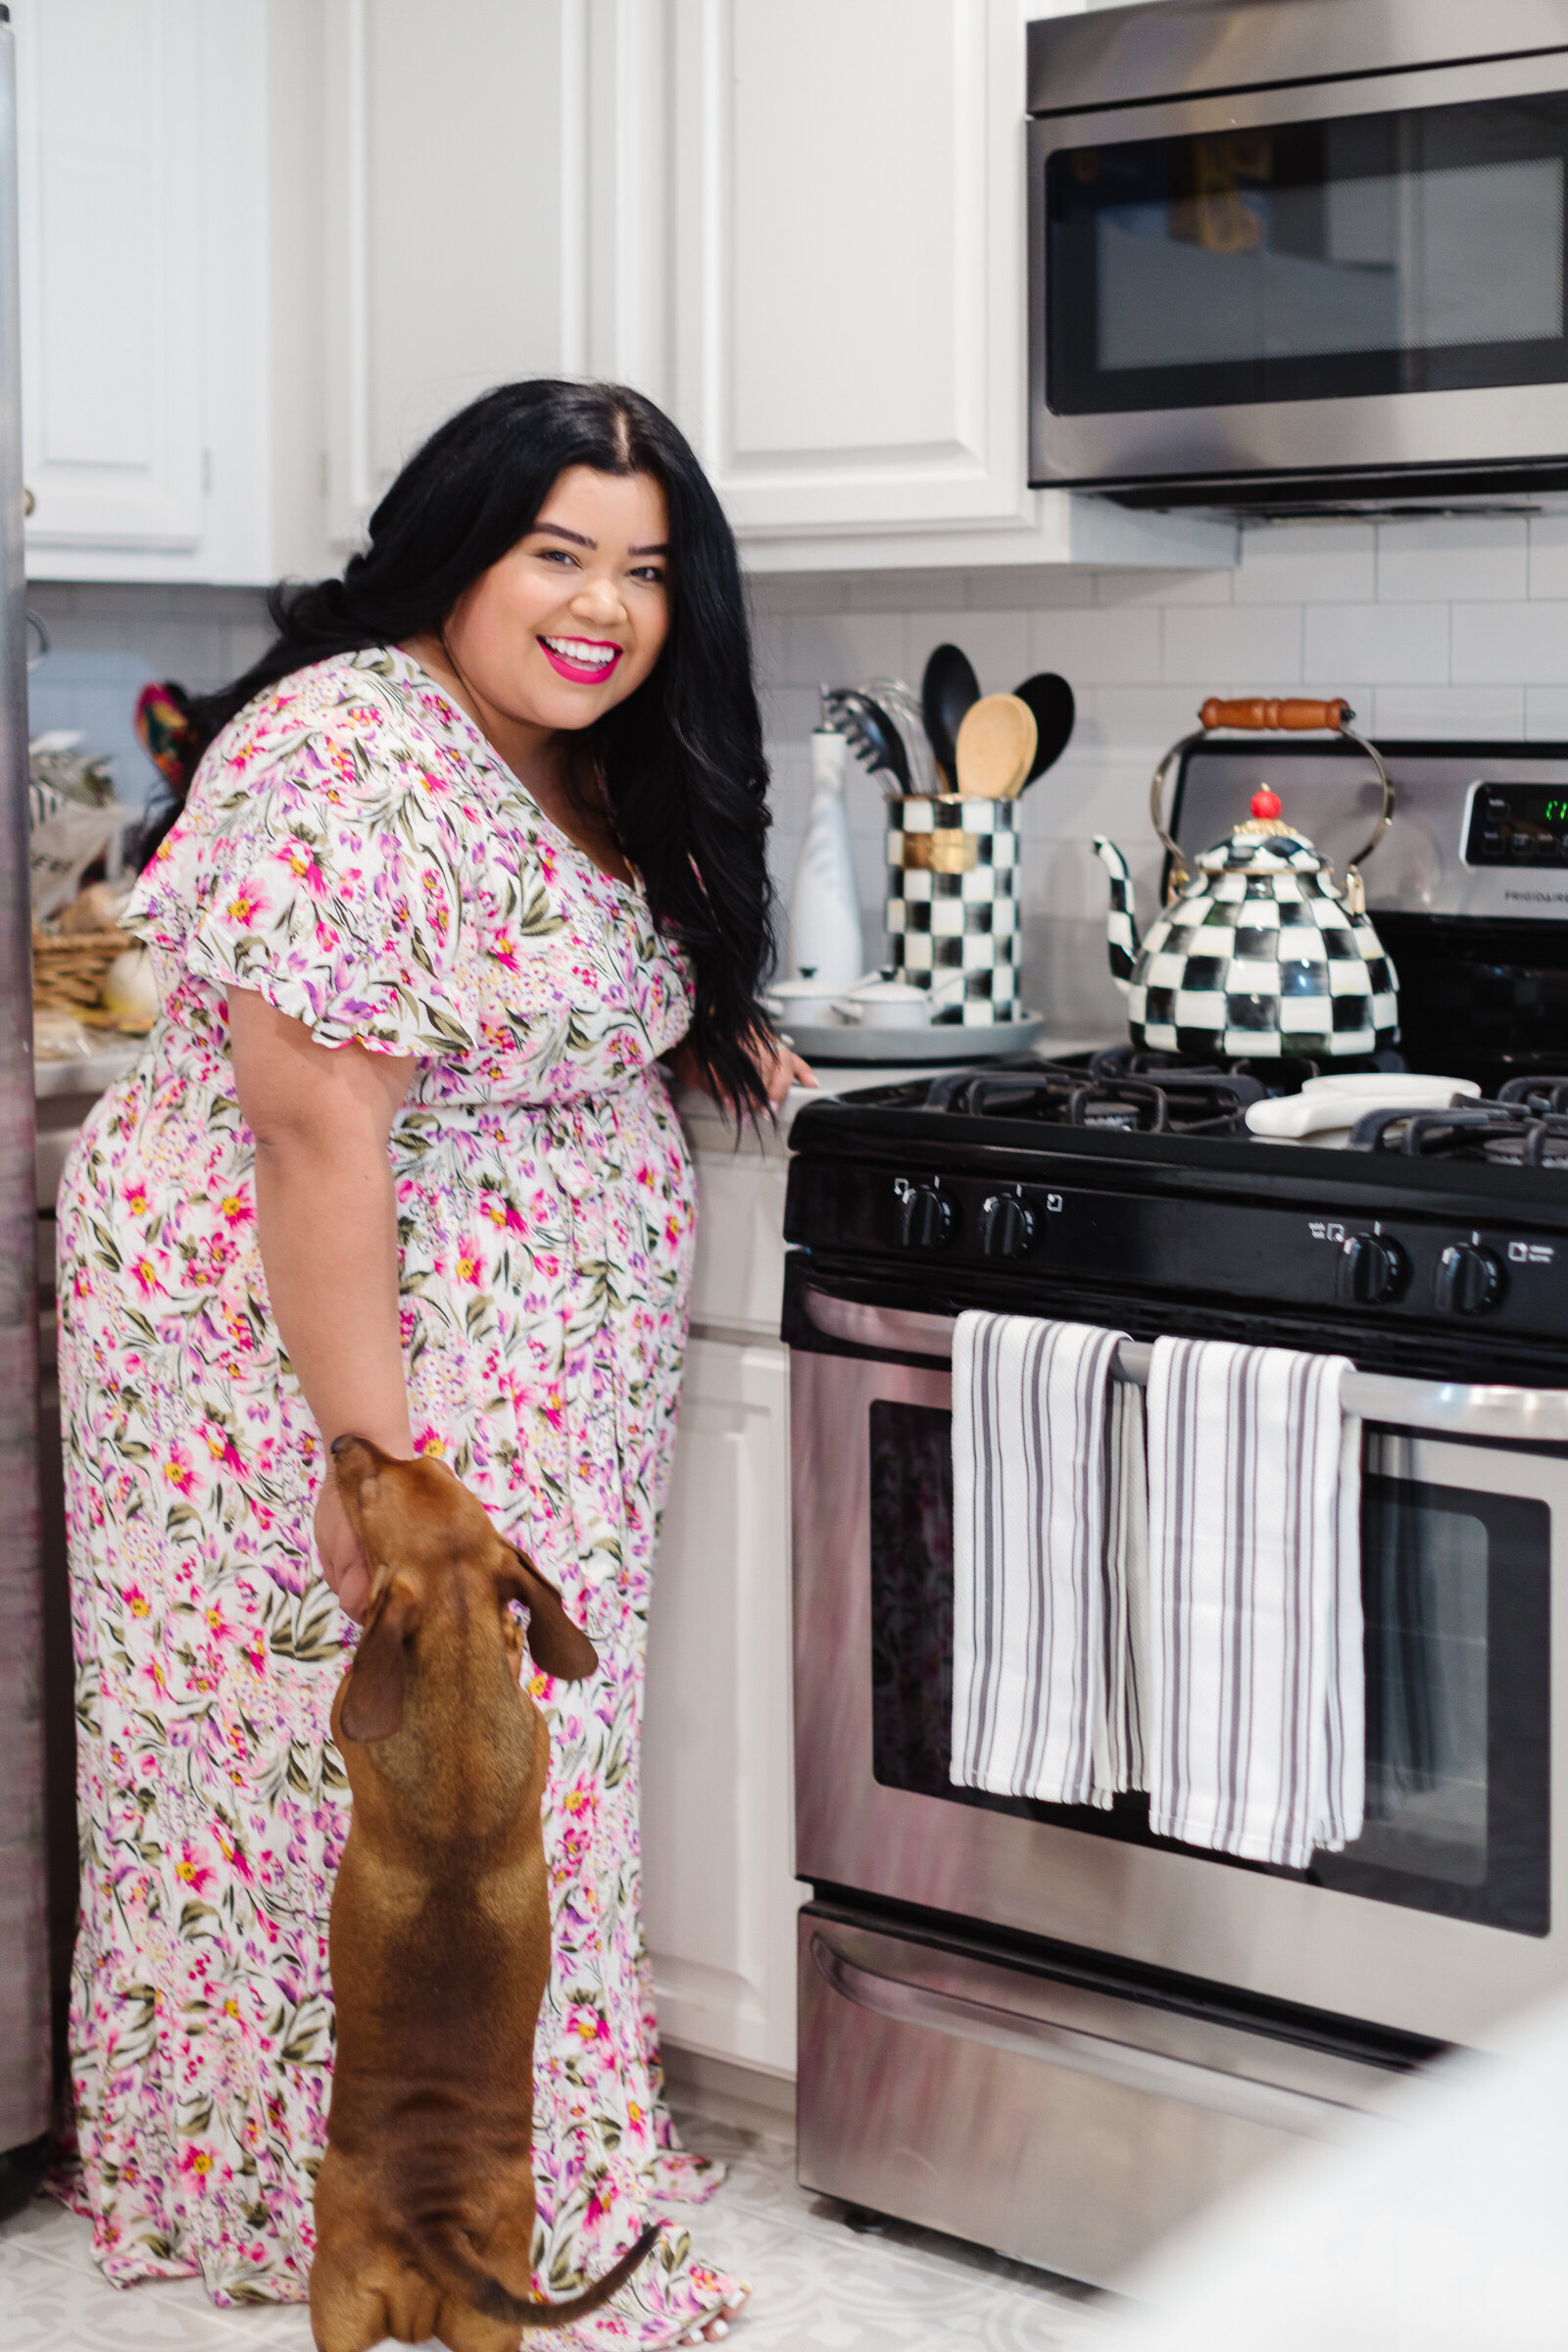 plus size woman in kitchen with dog